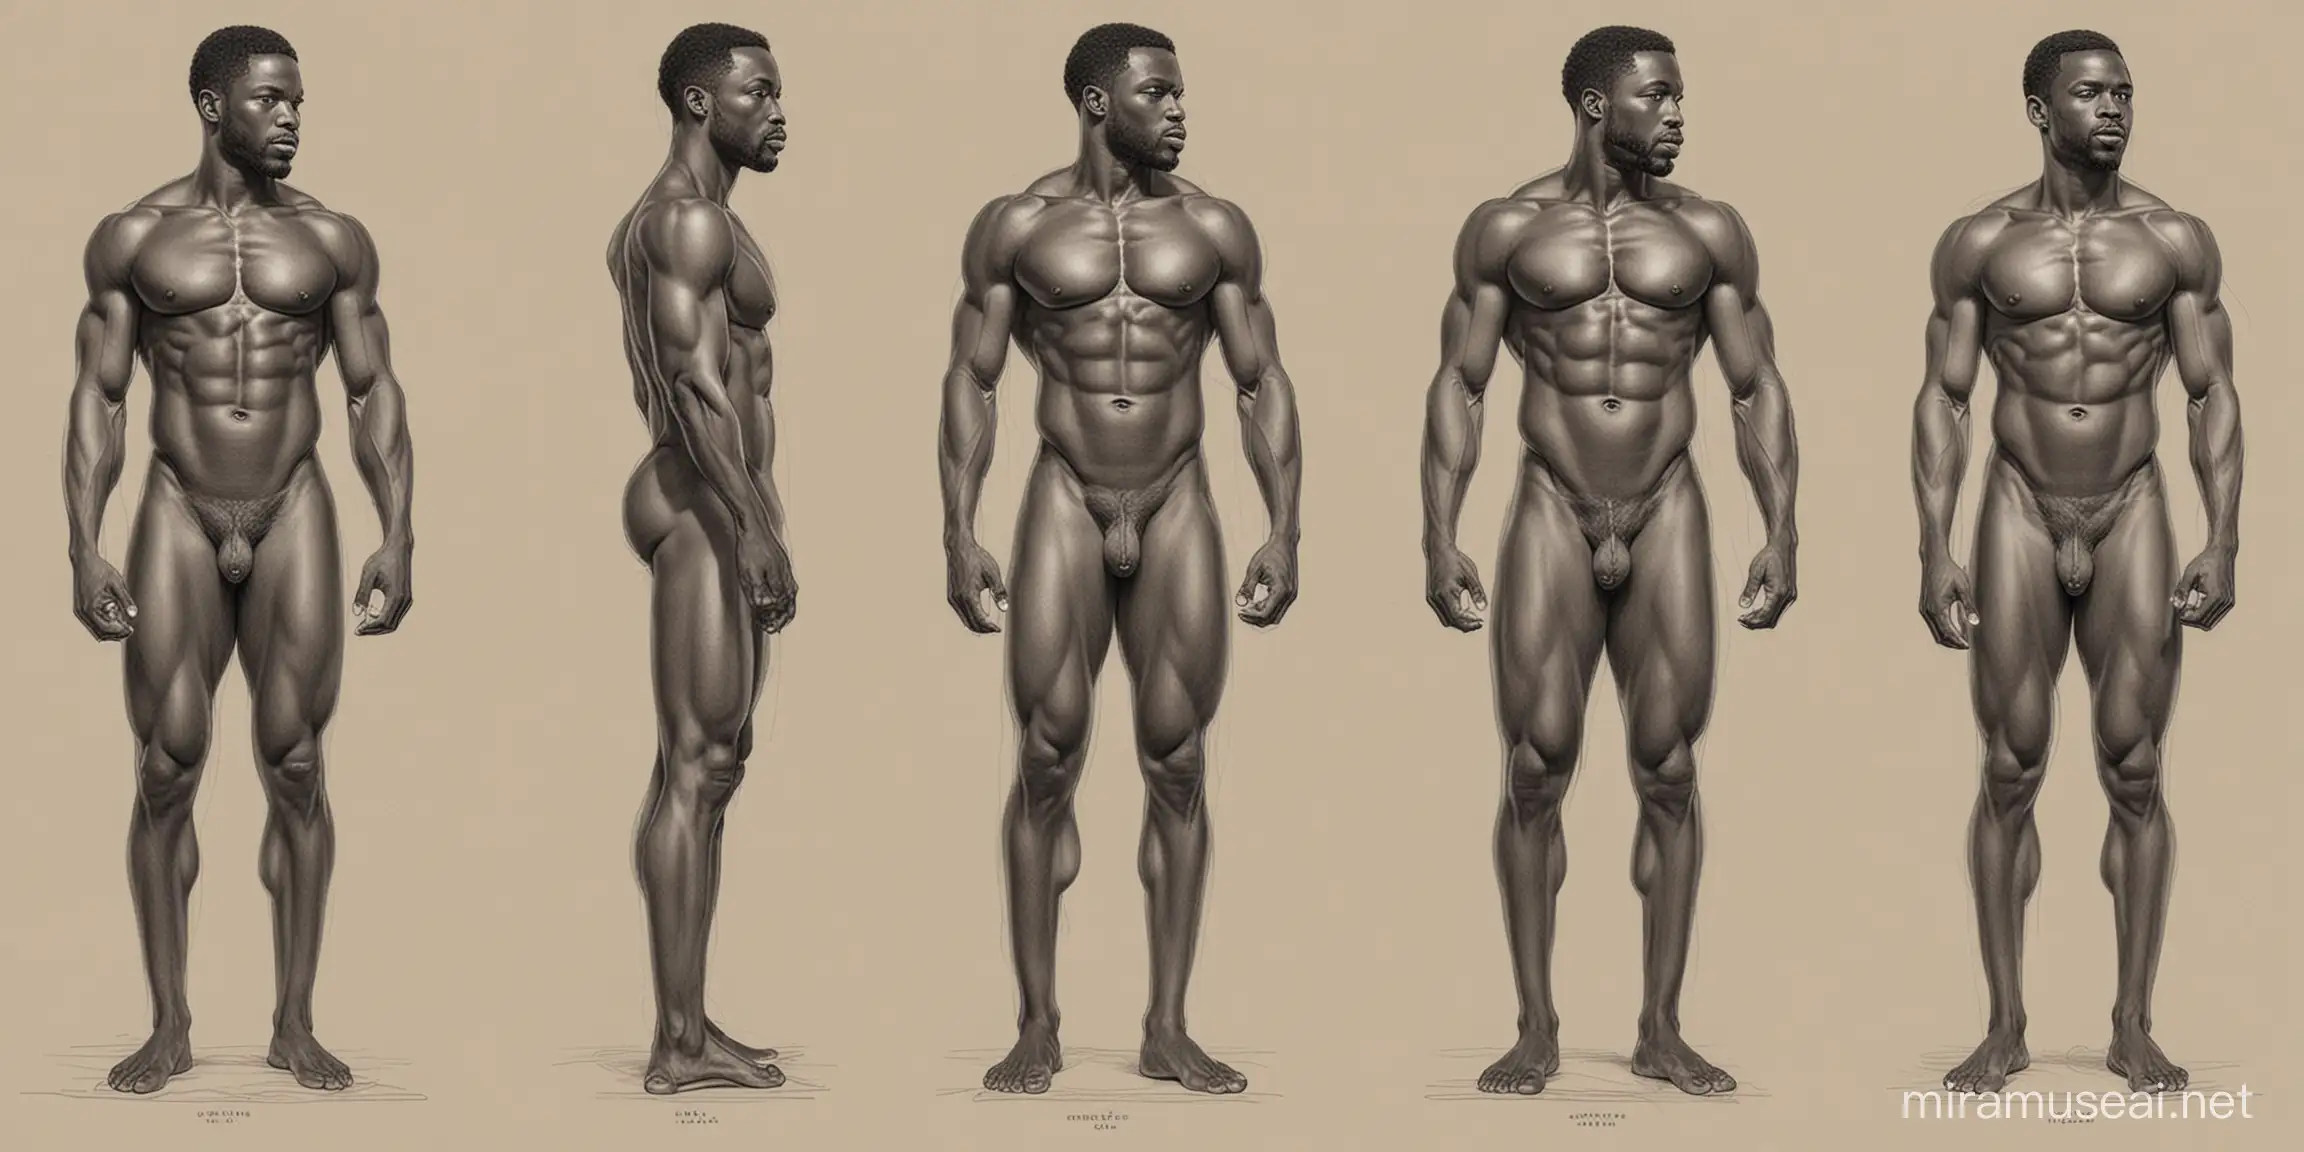 African Black Man Poses in GrecoRoman Style Nude Drawings